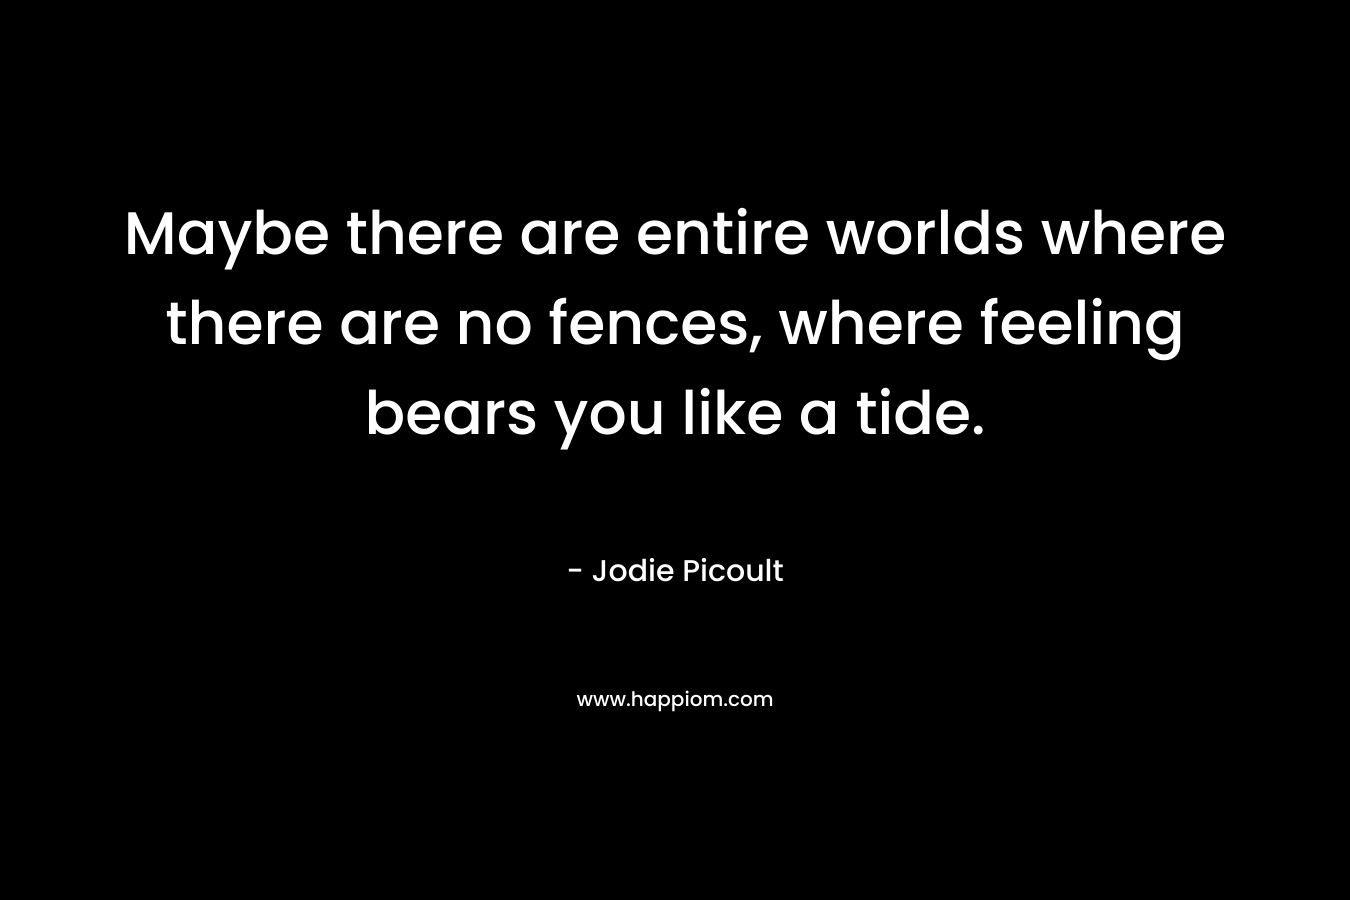 Maybe there are entire worlds where there are no fences, where feeling bears you like a tide.